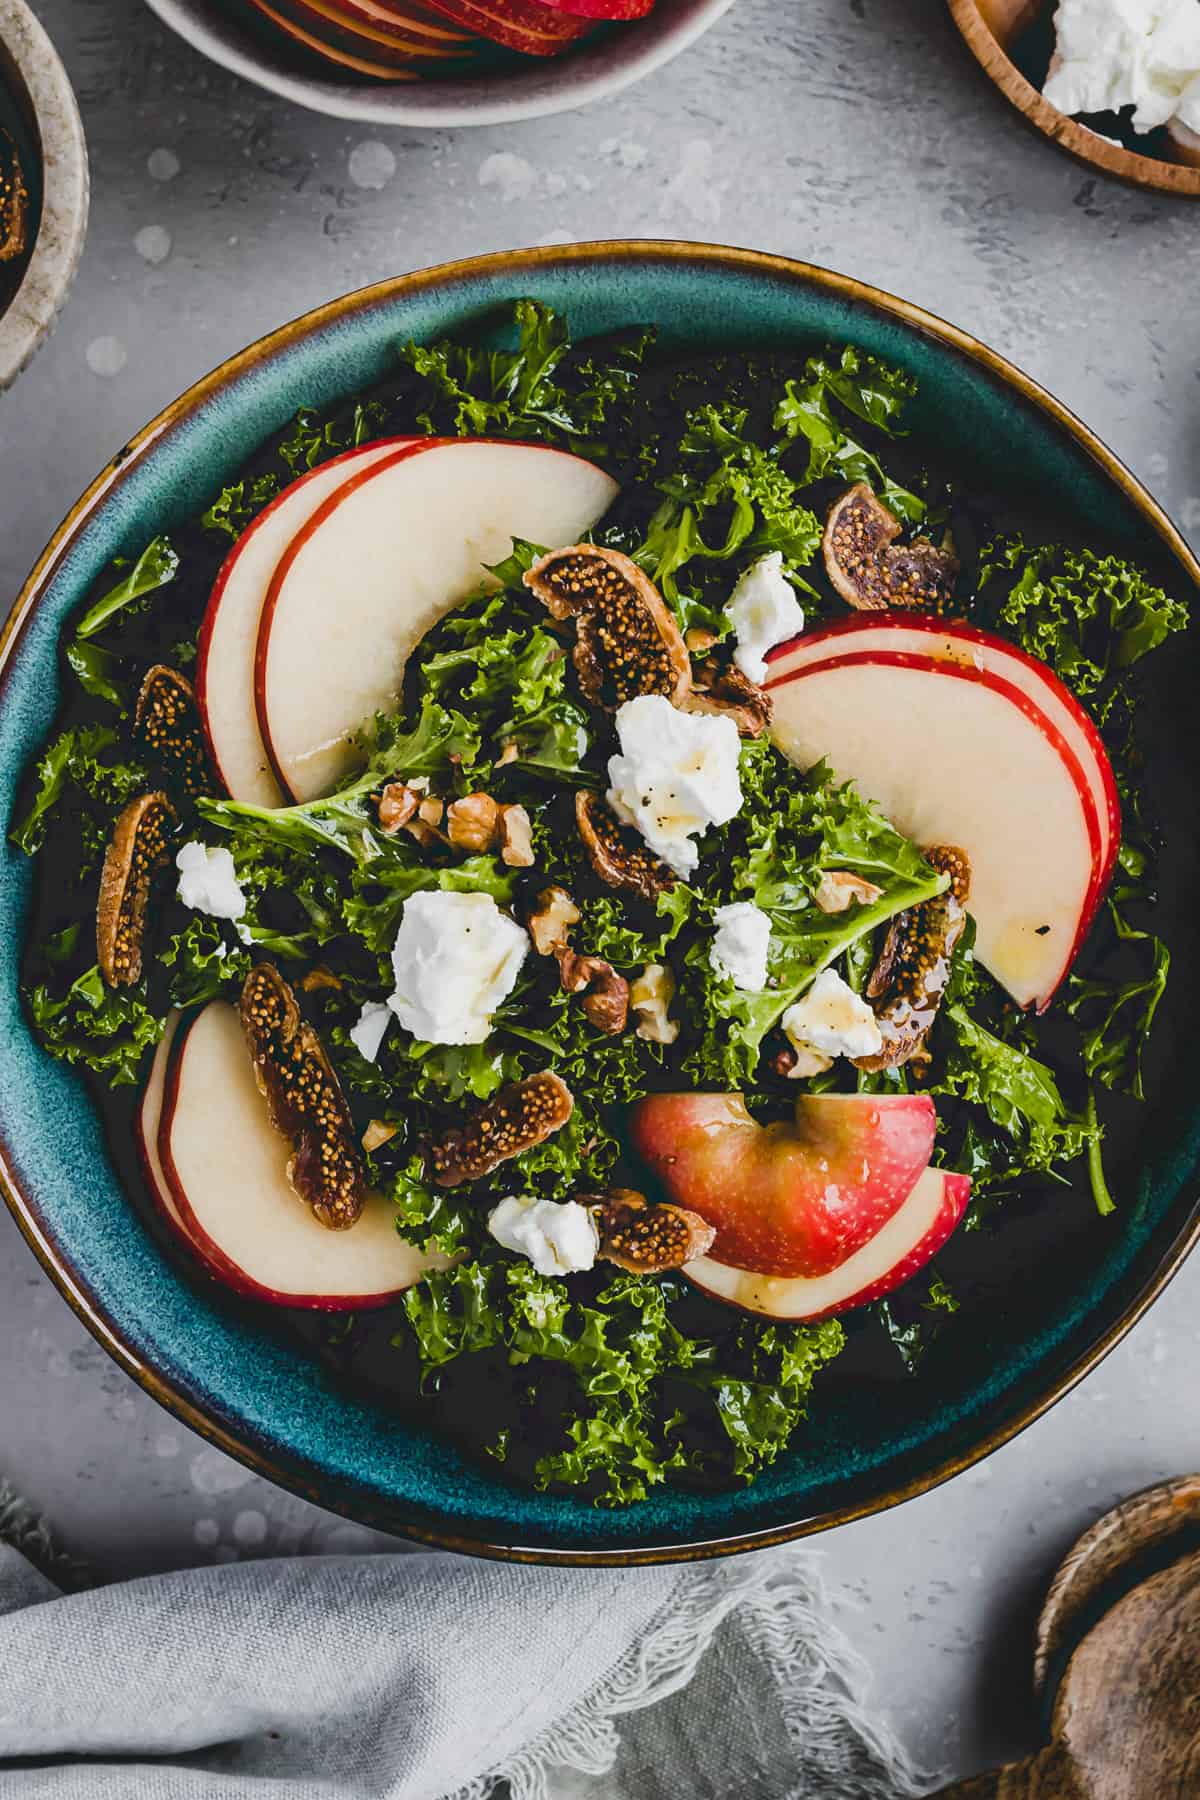 Kale salad with apples, figs, walnut and goat cheese in a salad bowl